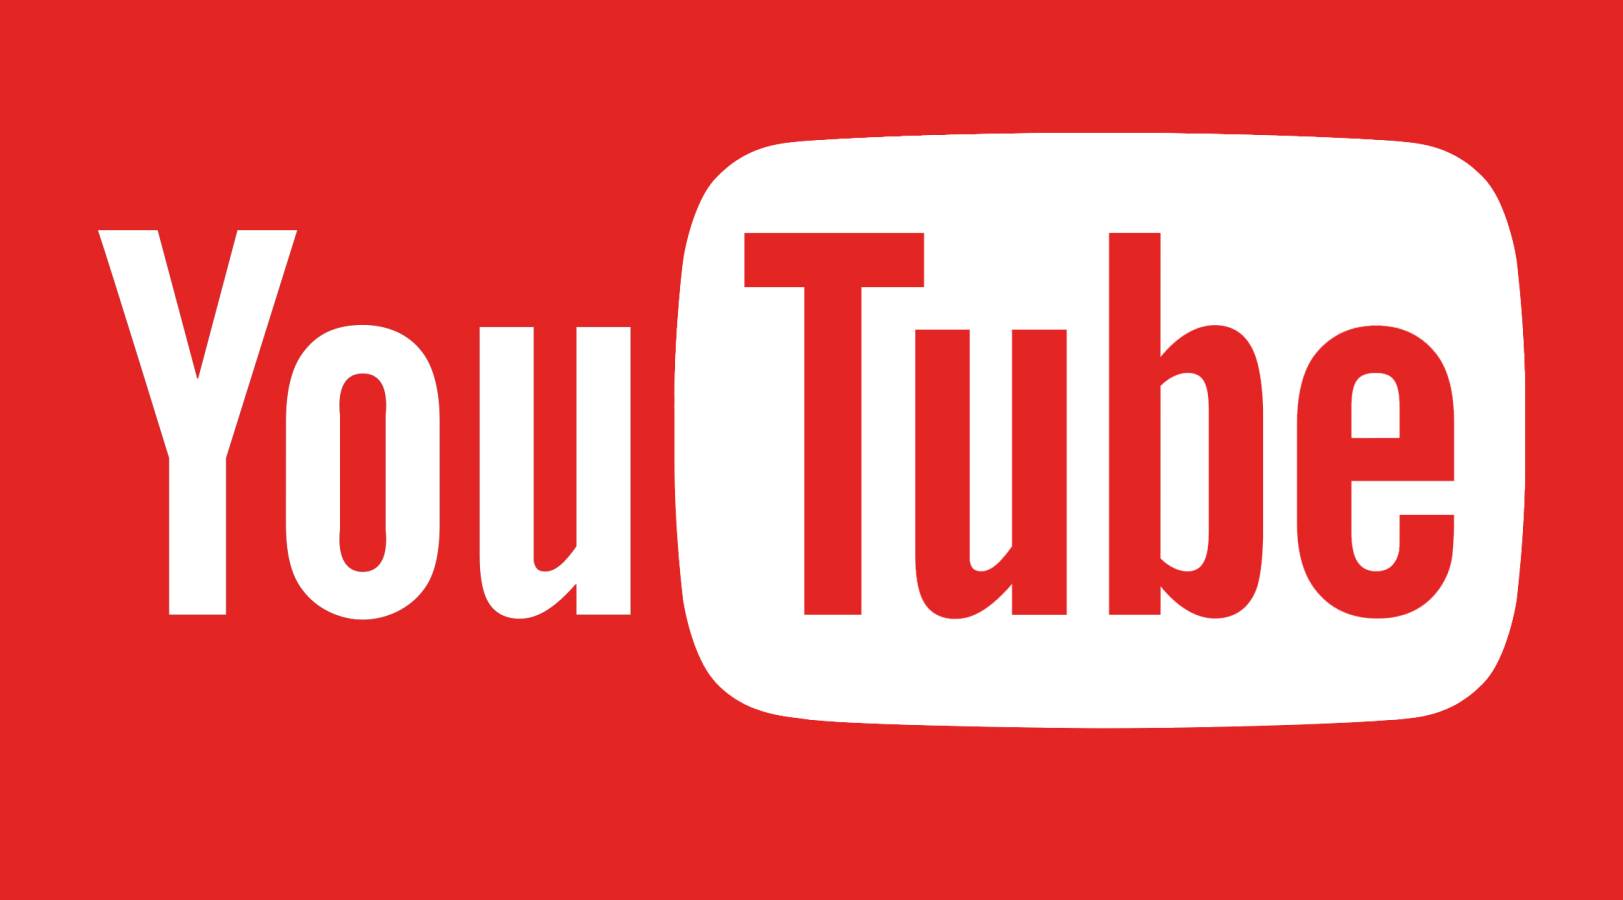 The YouTube application for Android and iPhone has been updated with changes